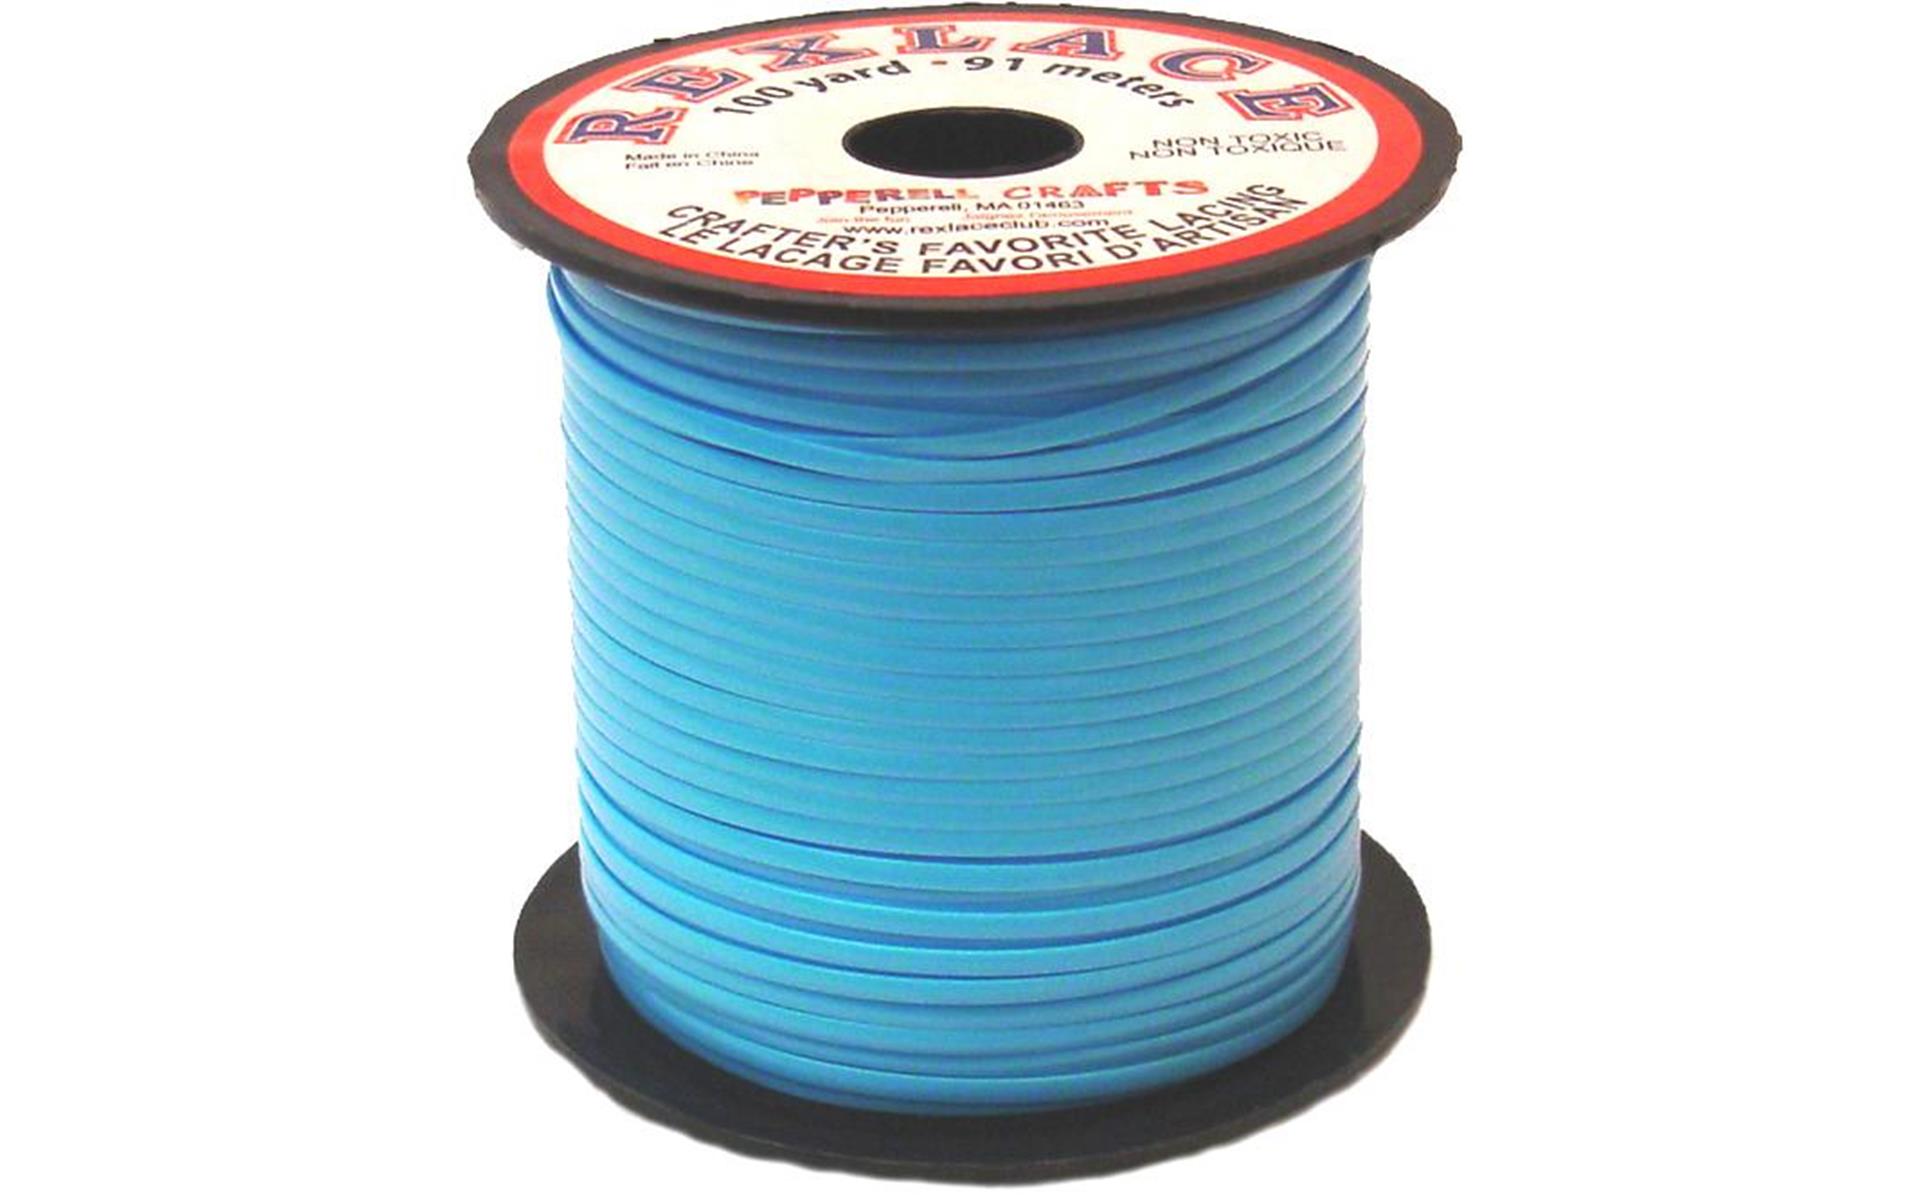 Pepperell Rexlace Plastic Lacing - 100 yards, Baby Blue - image 1 of 4